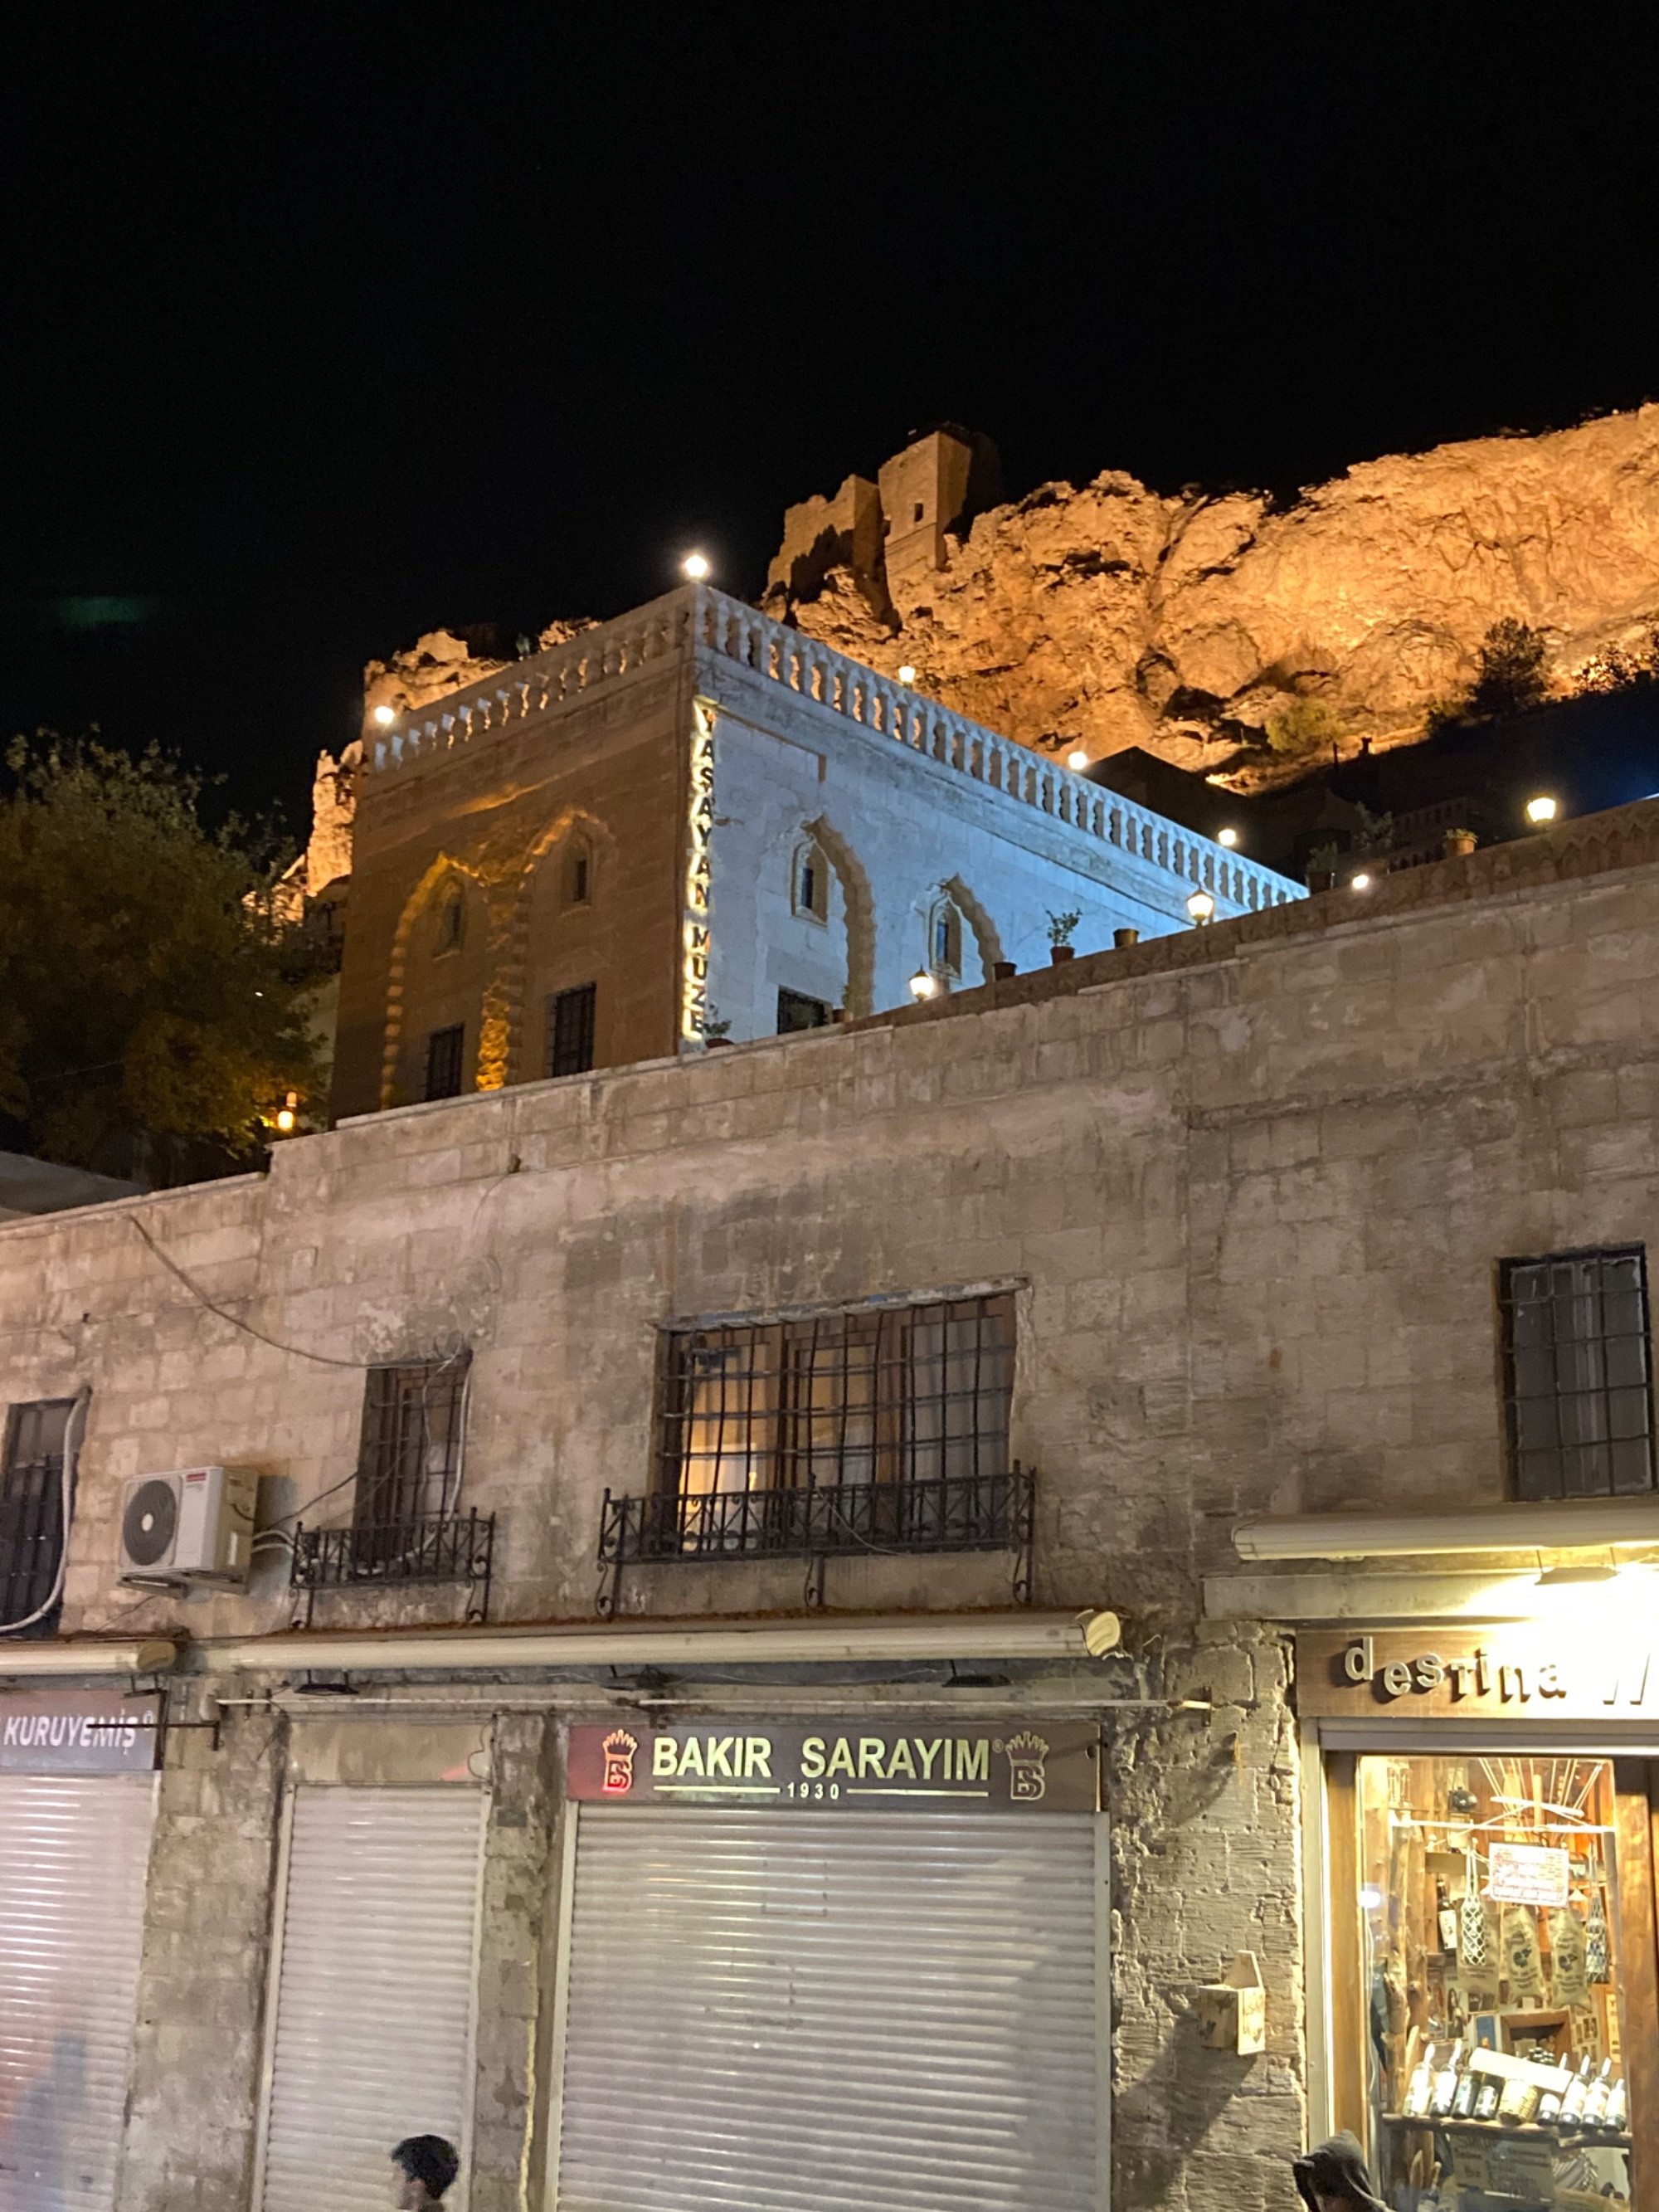 Views of old city are charming at night 